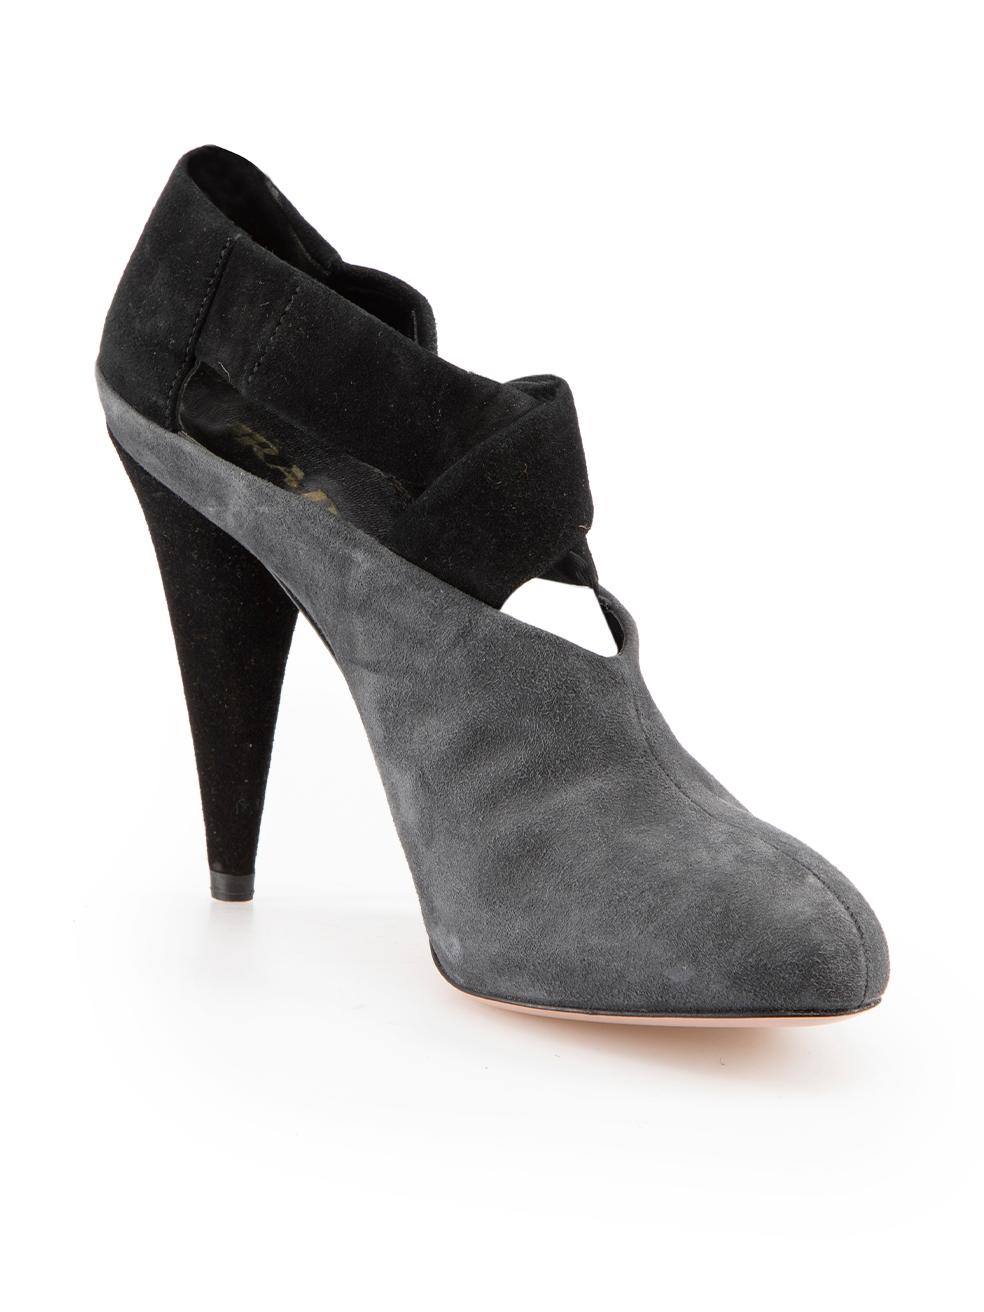 CONDITION is Very good. Minimal wear to shoes is evident. Minimal wear to both sides and the right heel with light marks to the suede on this used Prada designer resale item.
 
Details
Grey
Suede
Ankle boots
High heeled
Almond toe
Black suede strap